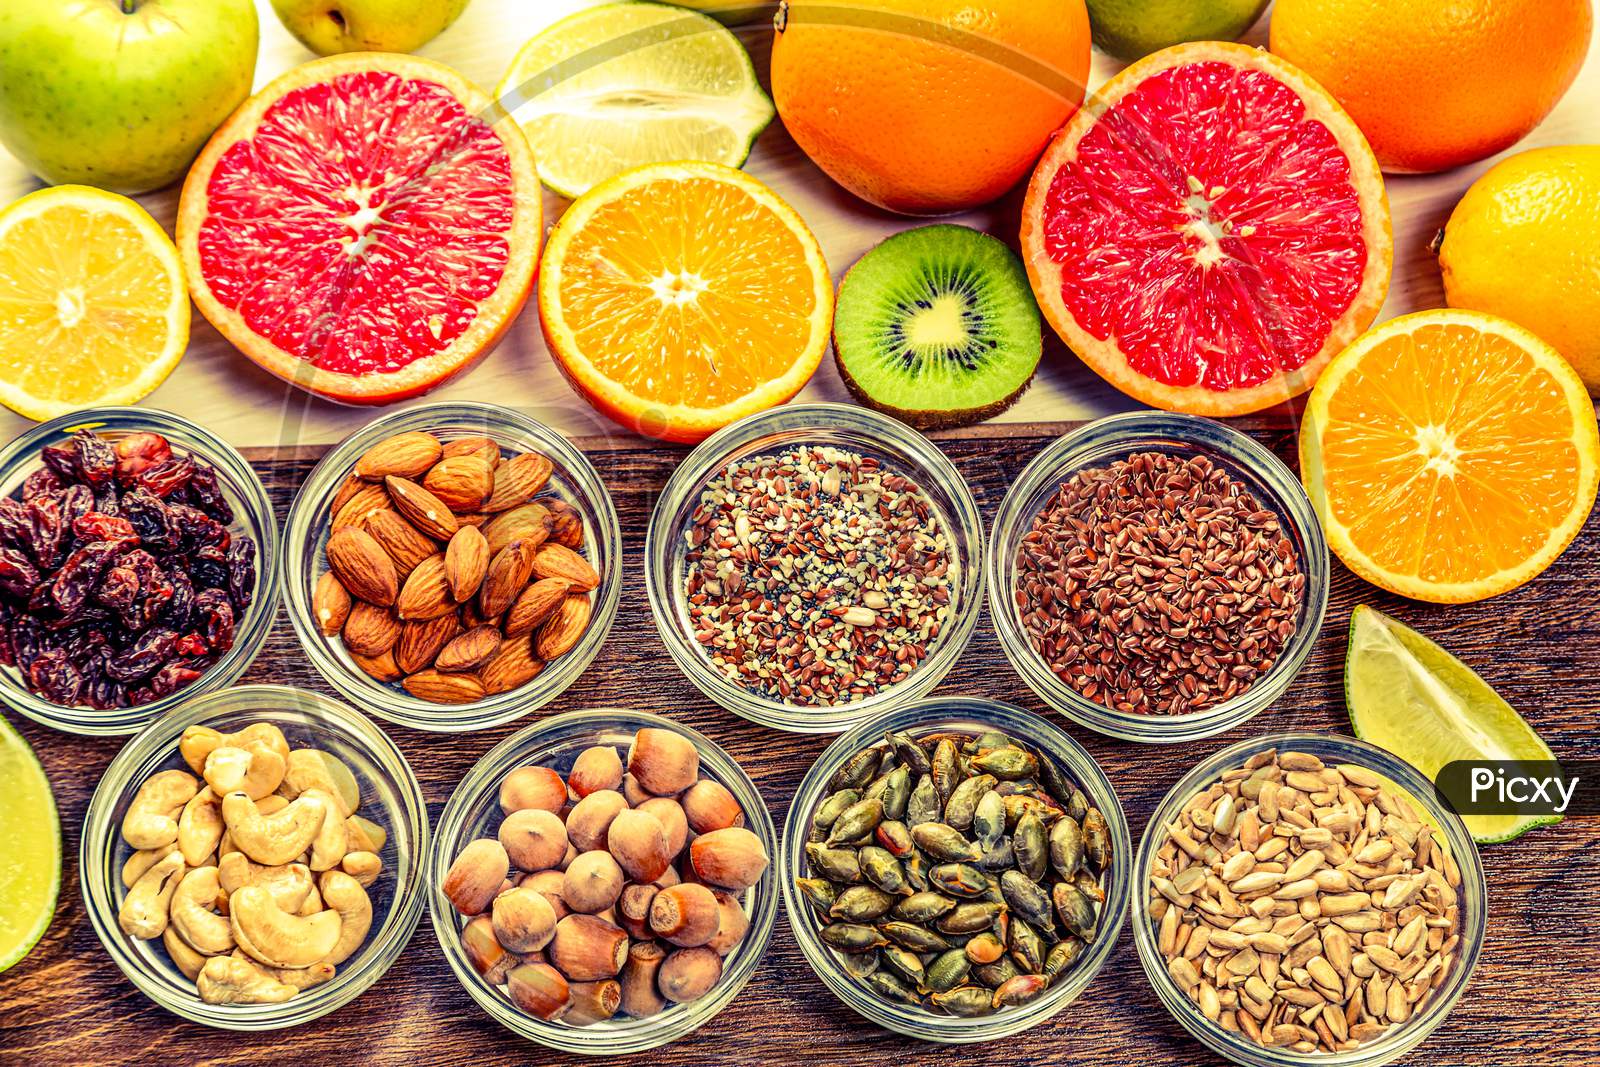 Assortment of colorful fresh fruits, nuts and seeds.